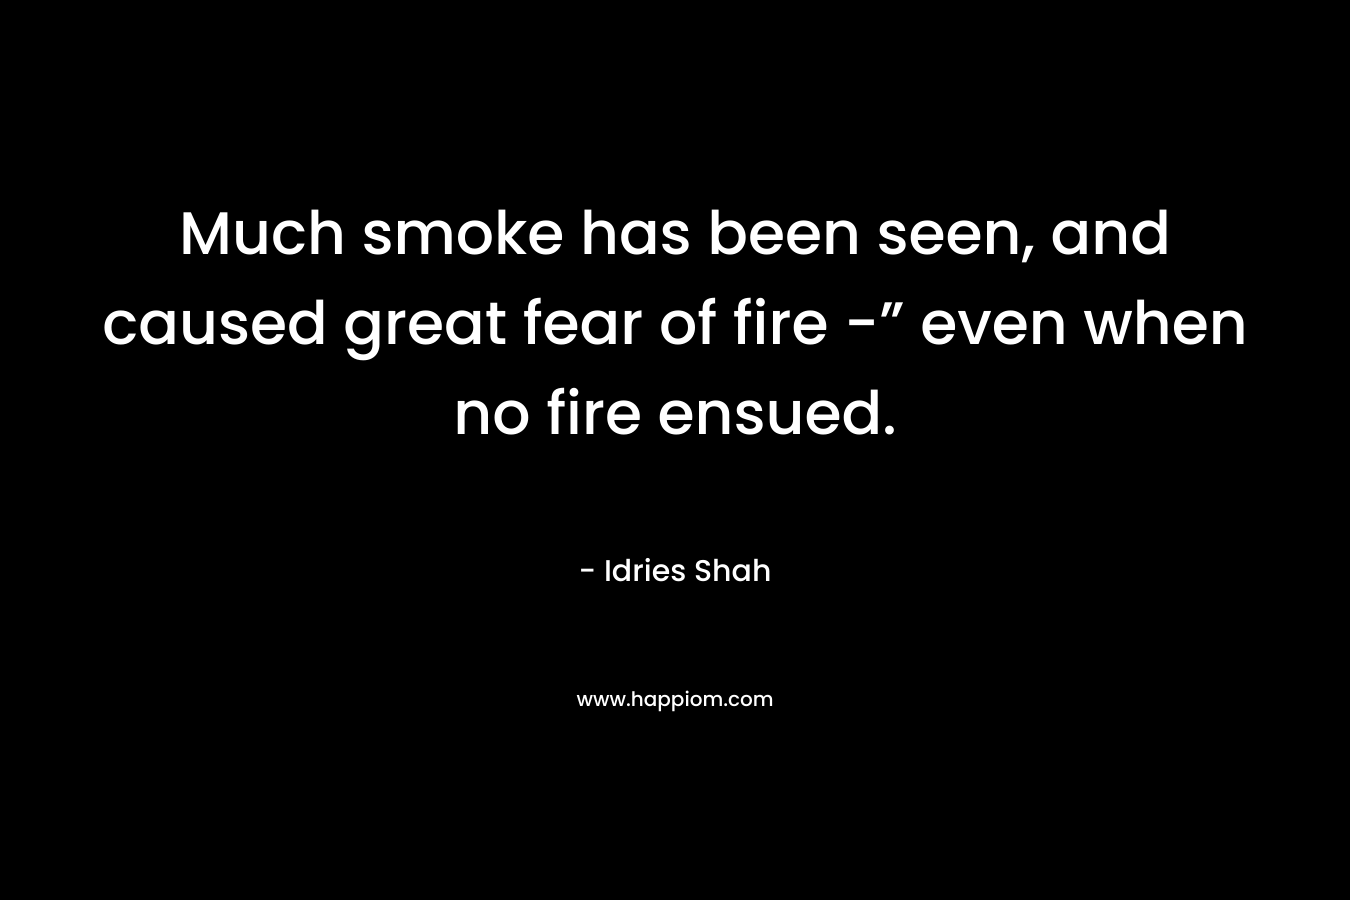 Much smoke has been seen, and caused great fear of fire -” even when no fire ensued. – Idries Shah